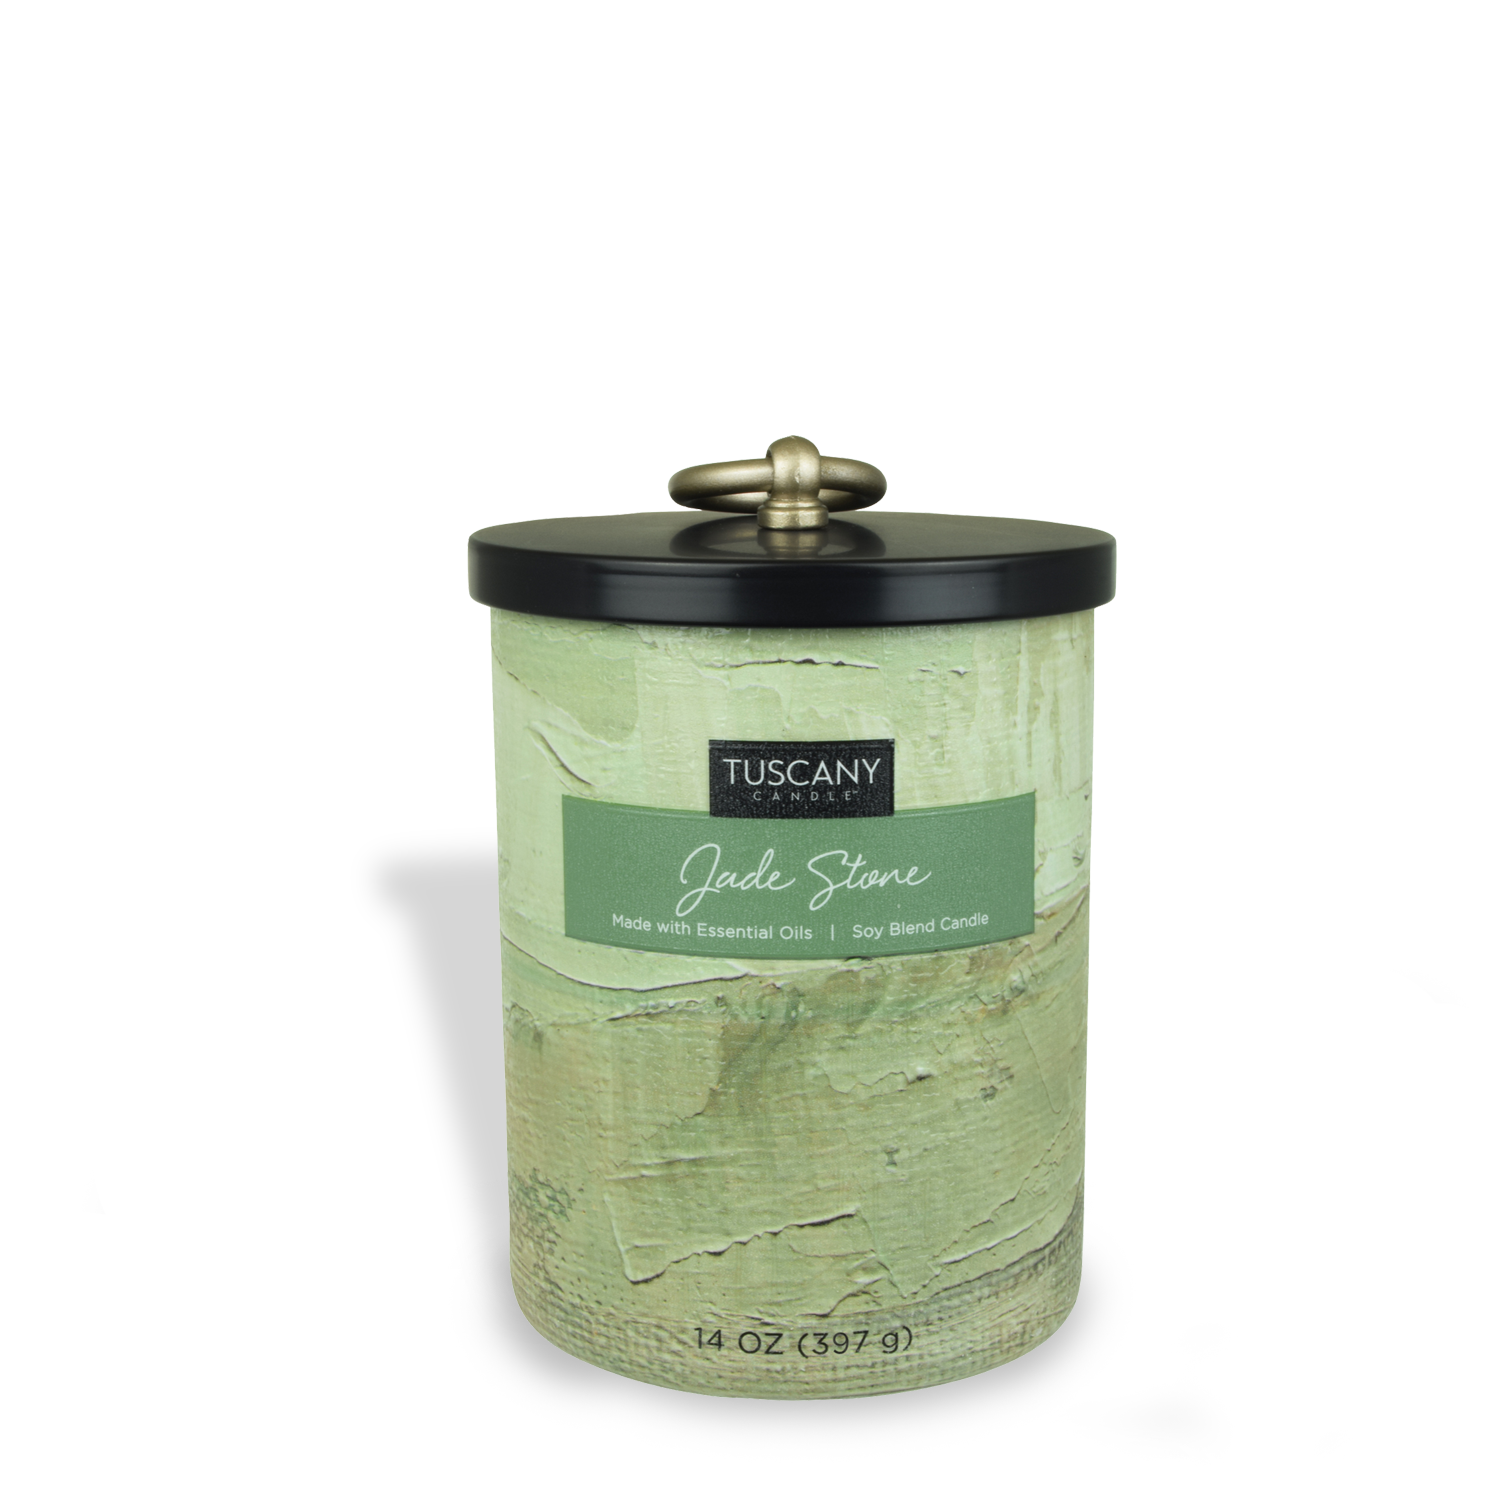 A Jade Stone Scented Jar Candle (14 oz) from the Tuscany Candle brand, with a green tin and a black lid, perfect for home décor and containing essential oils for a delightful fragrance experience.